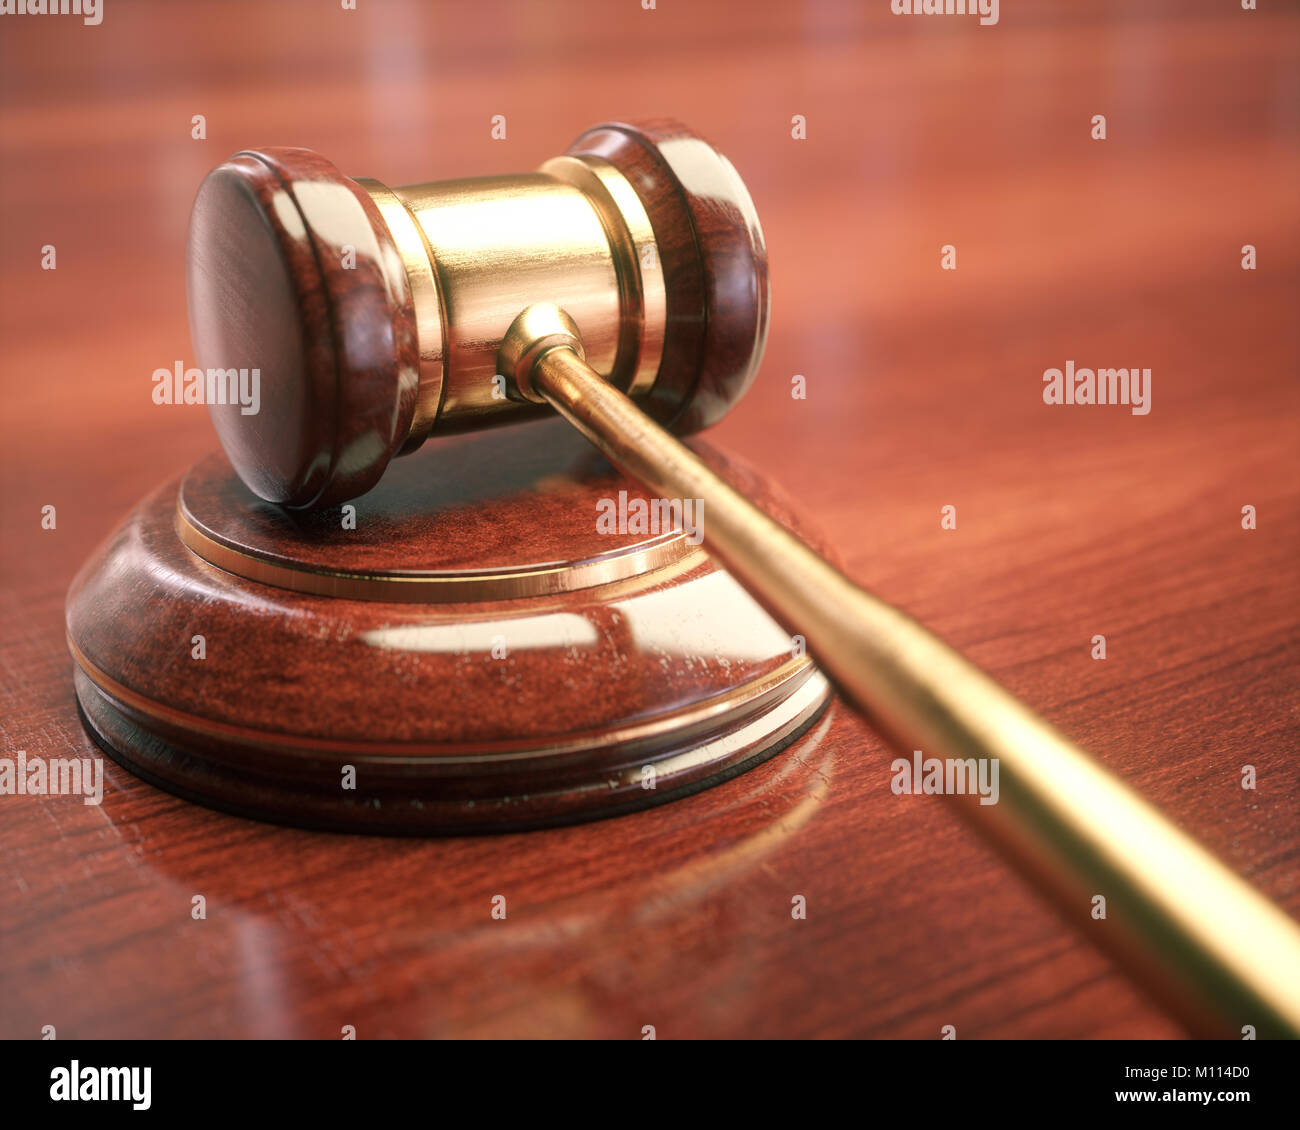 Gavel, judge hammer. Close up of wooden hammer with gold details. Concepts of law and auction. Stock Photo